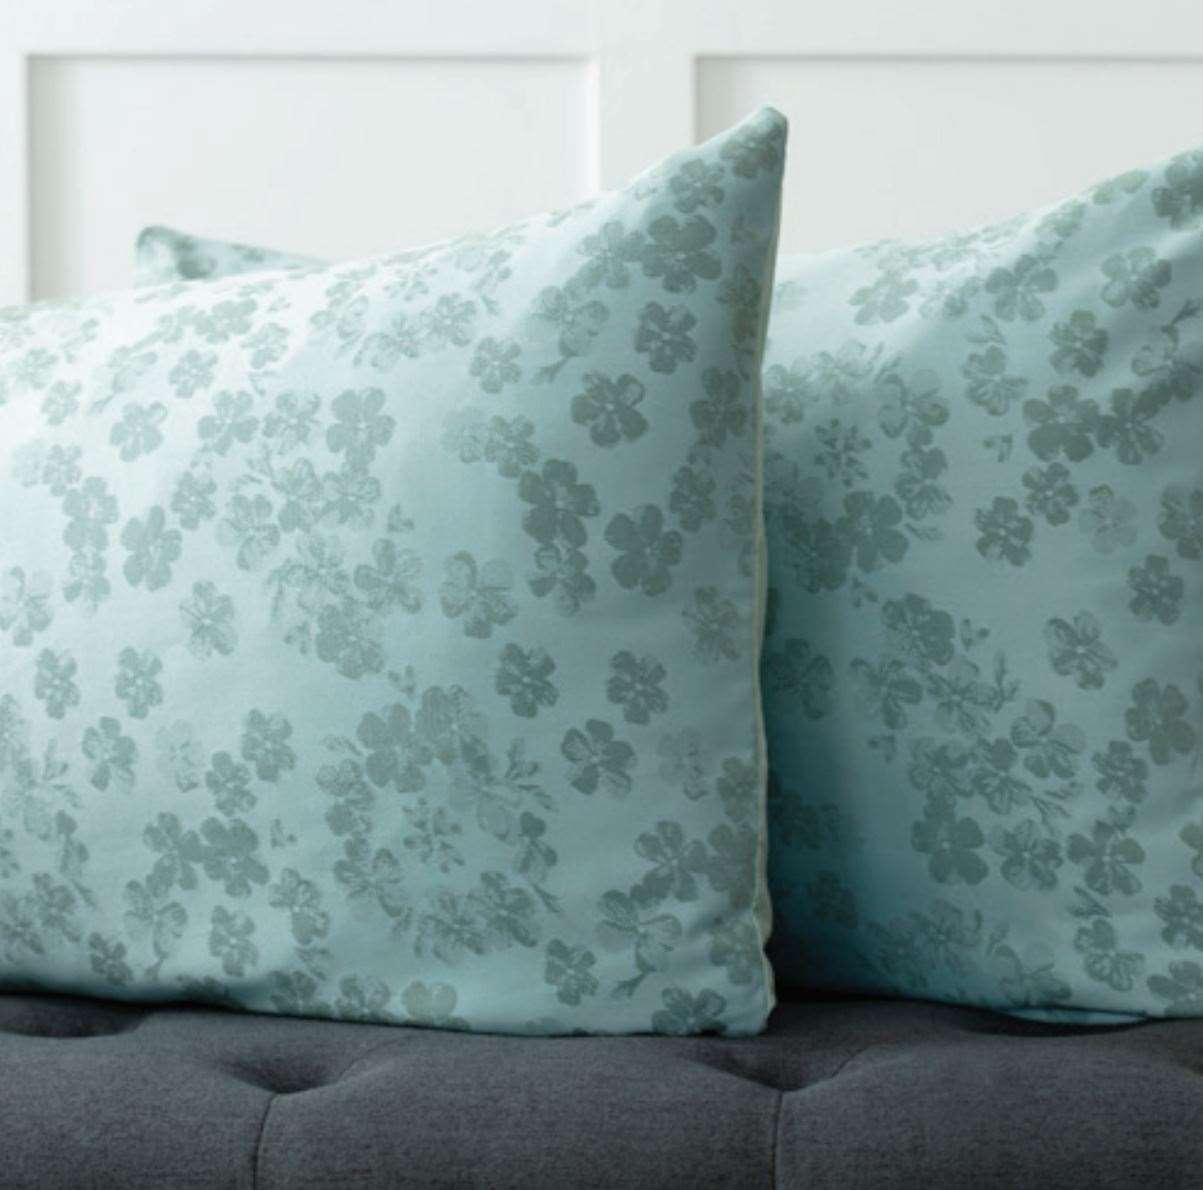 Pillowcases for Flora is a modern floral jacquard in a warm shade of duck egg green. The beauty of the design is in the simplicity of the pretty scattered petals.